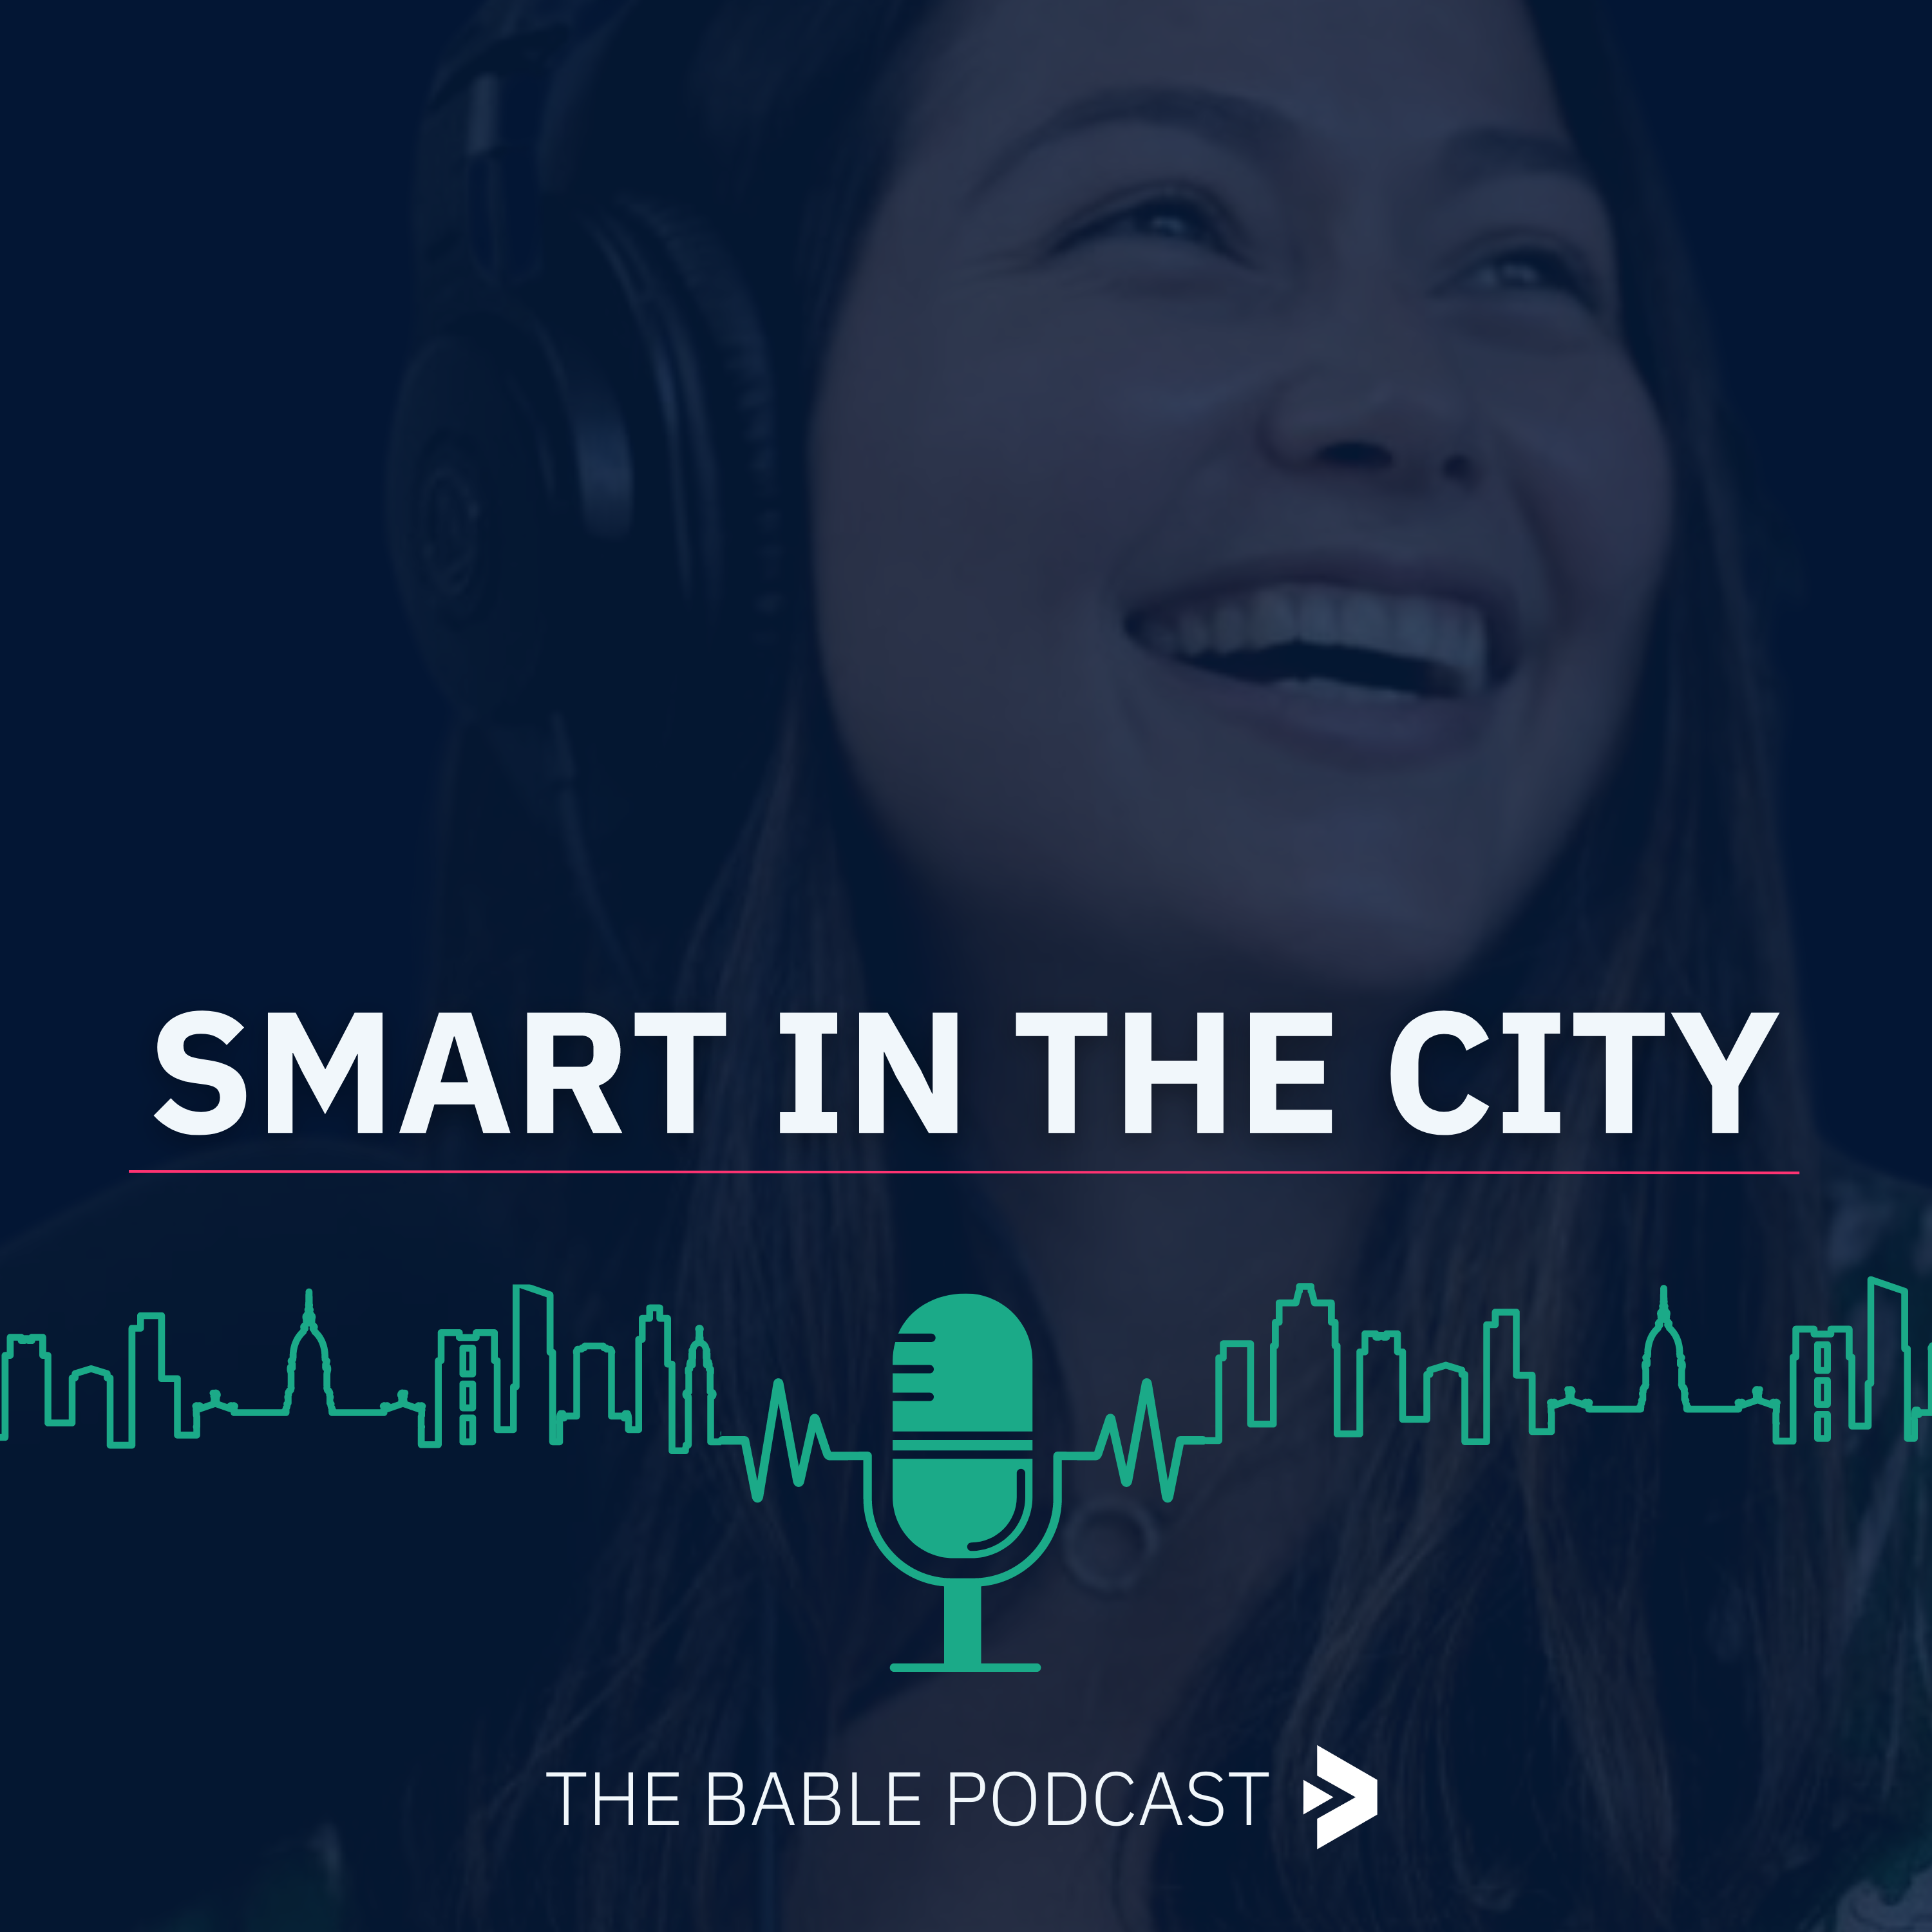 Trailer: What is a Smart City?